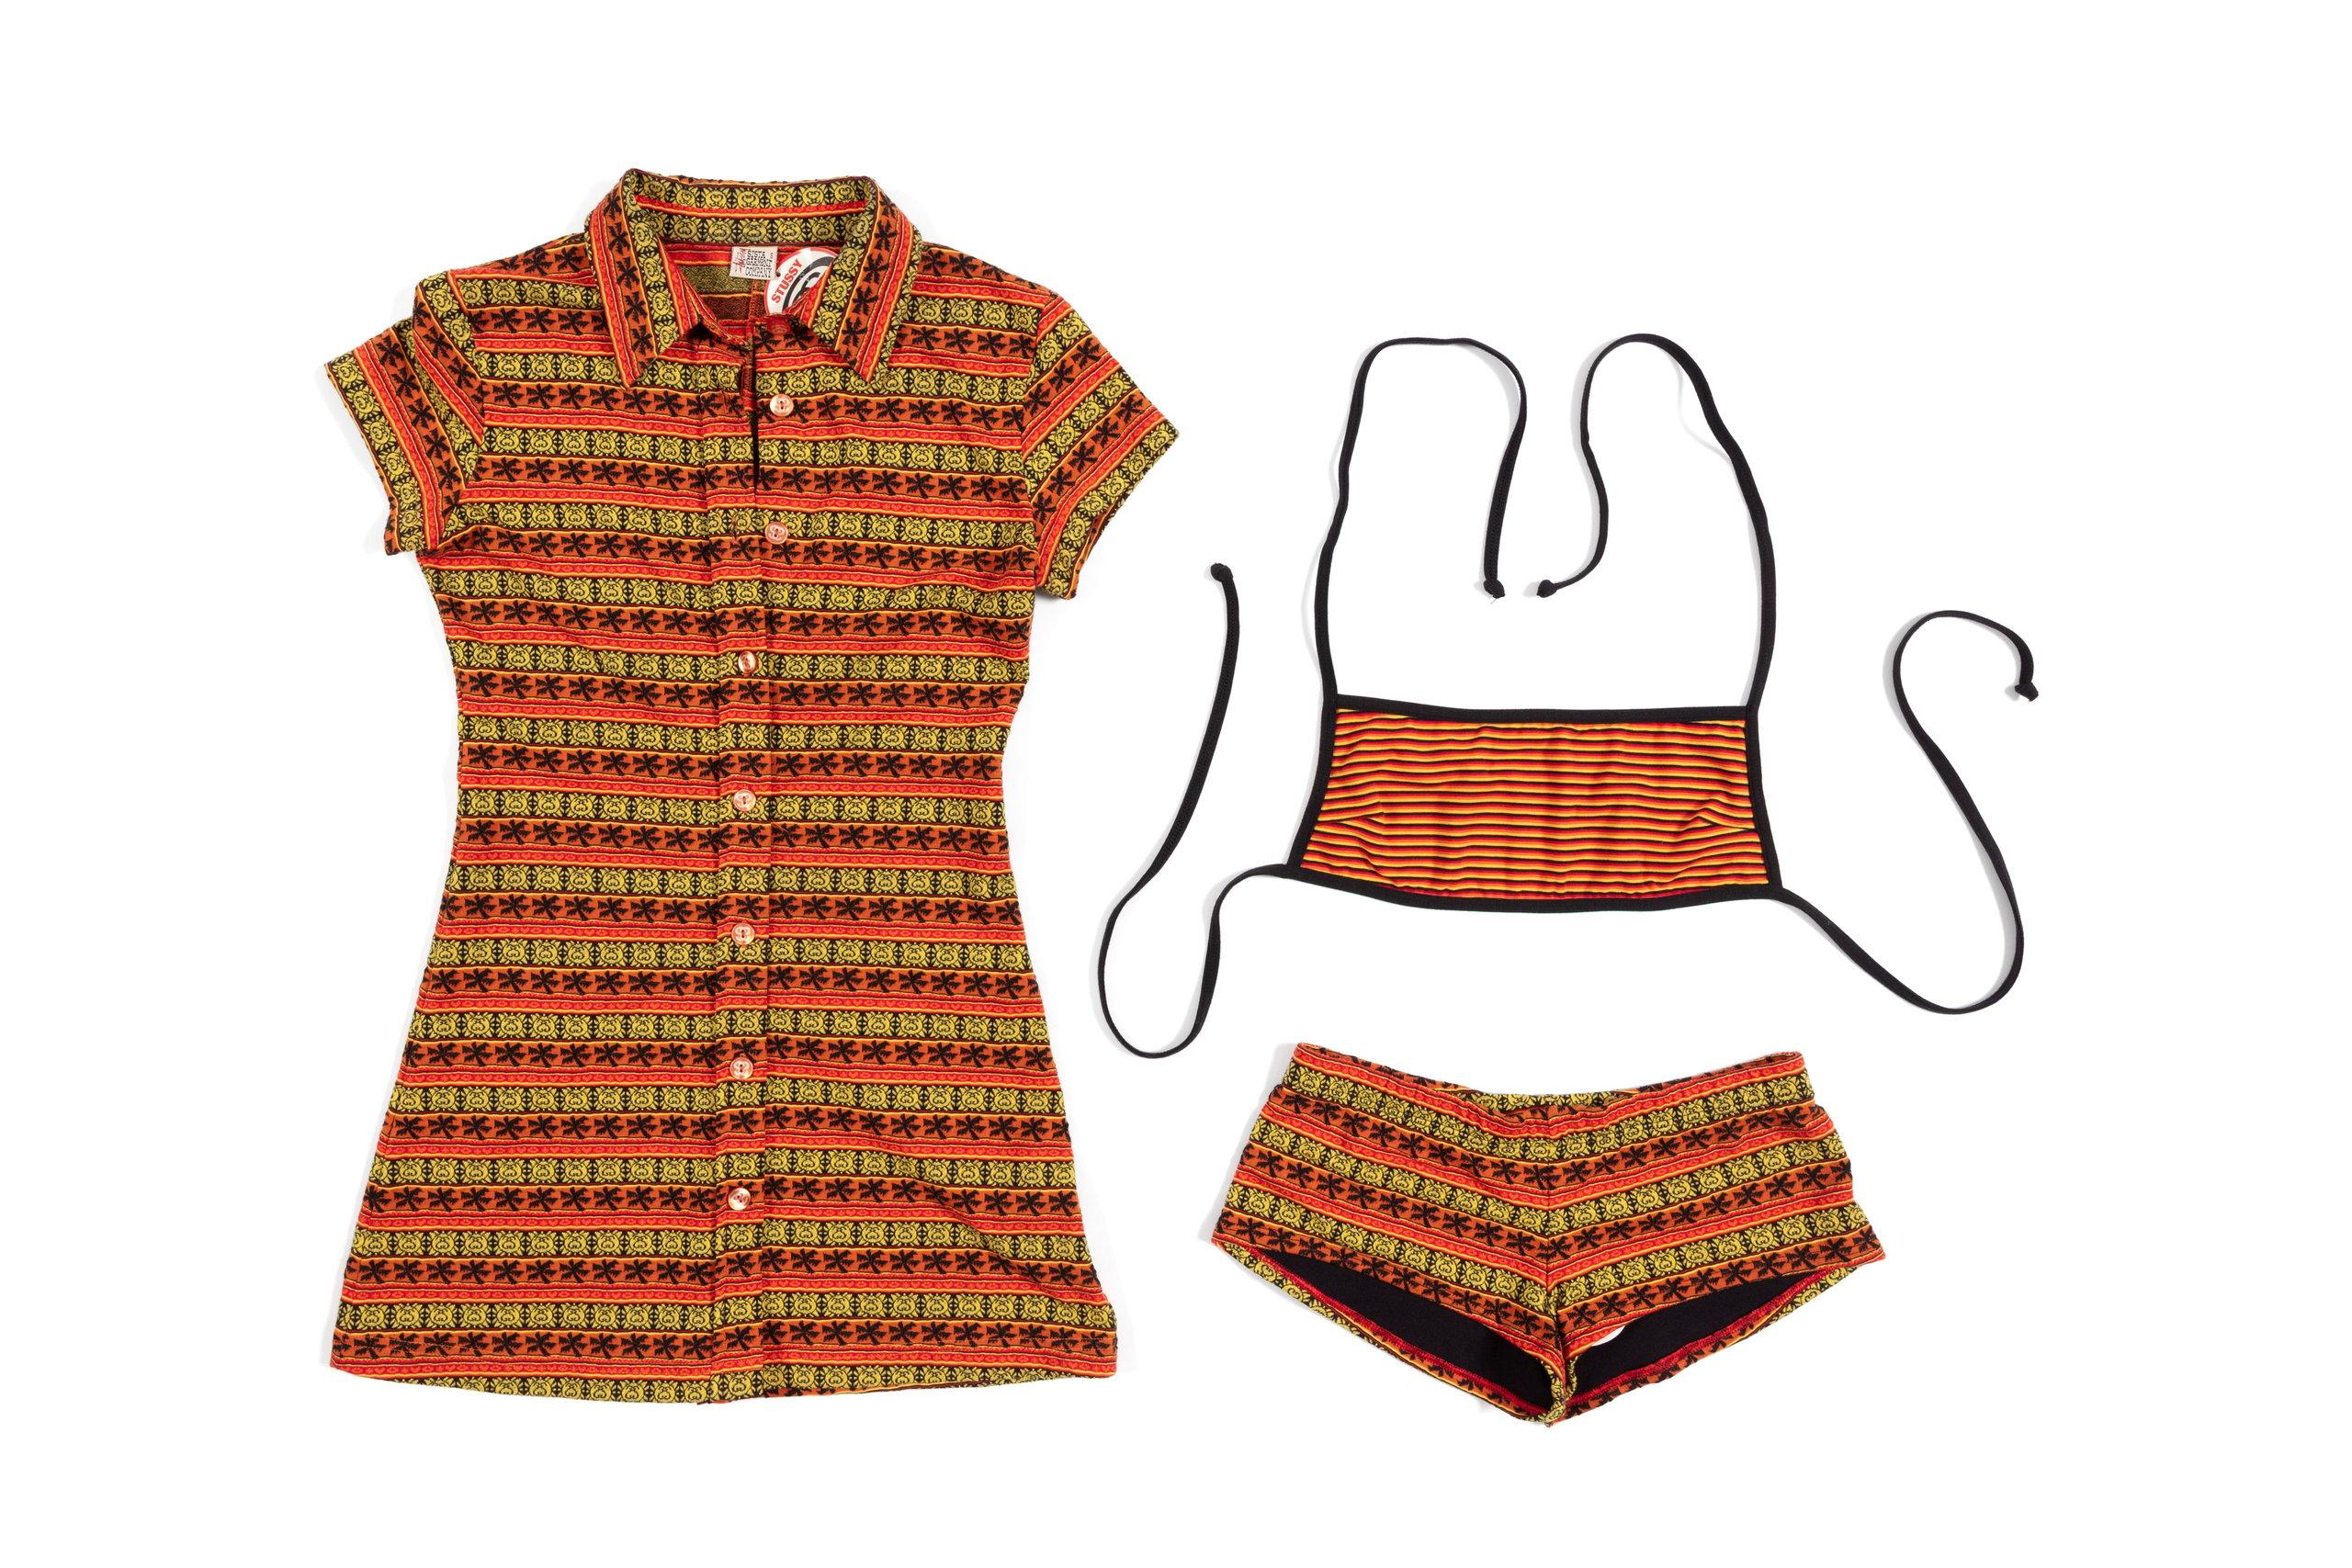 'Sista Sunset' outfit designed by Sara Thorn for Stussy Sista